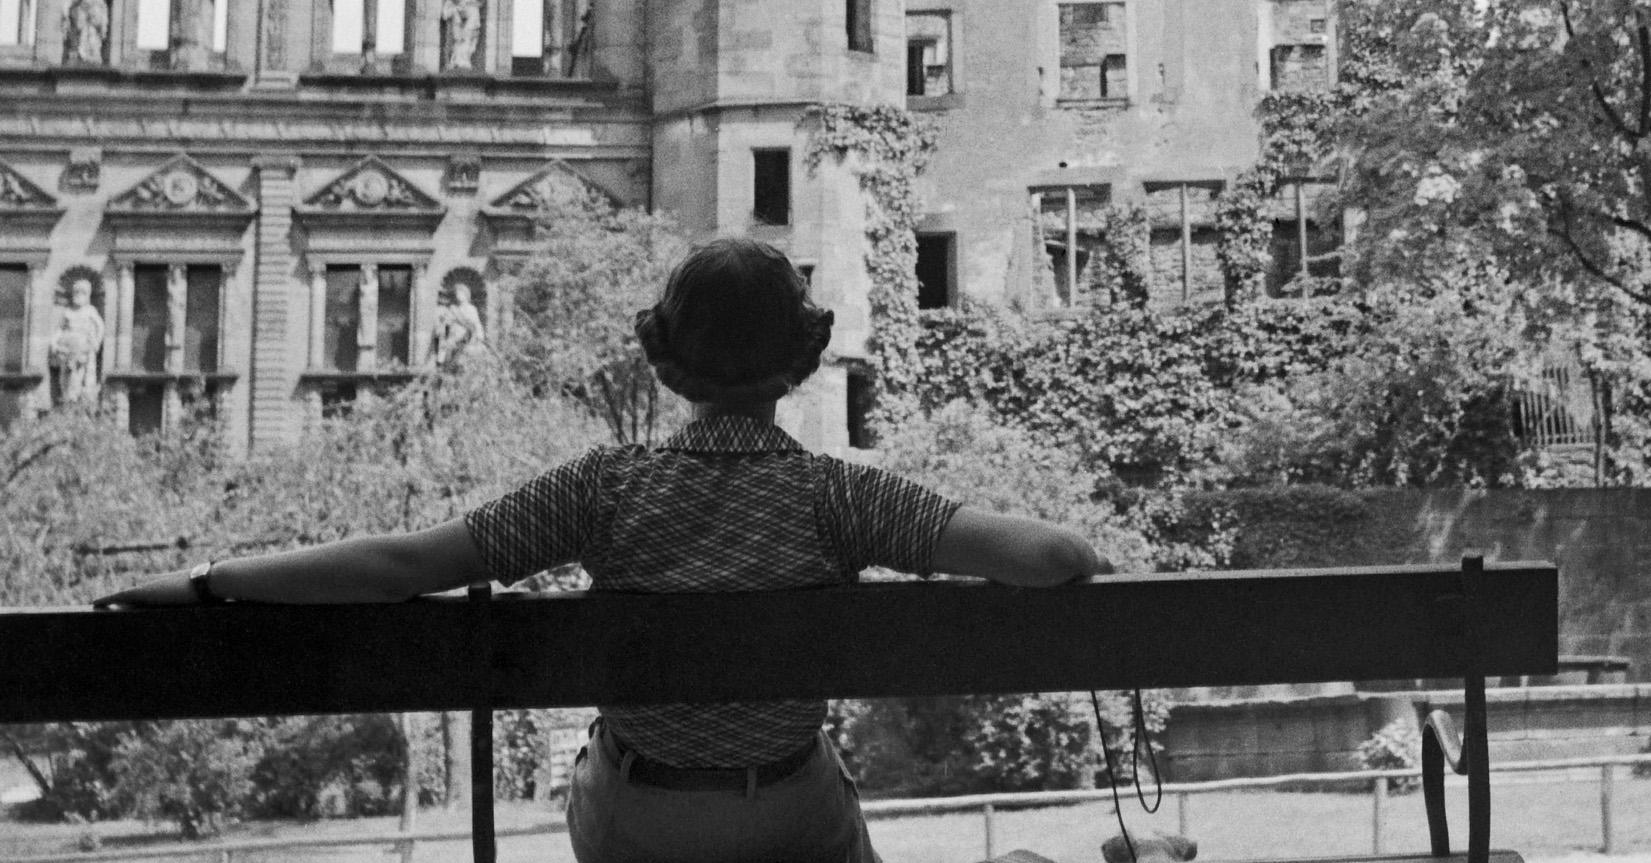 Woman on bench in front of Heidelberg castle, Germany 1936, Printed Later  - Photograph by Karl Heinrich Lämmel